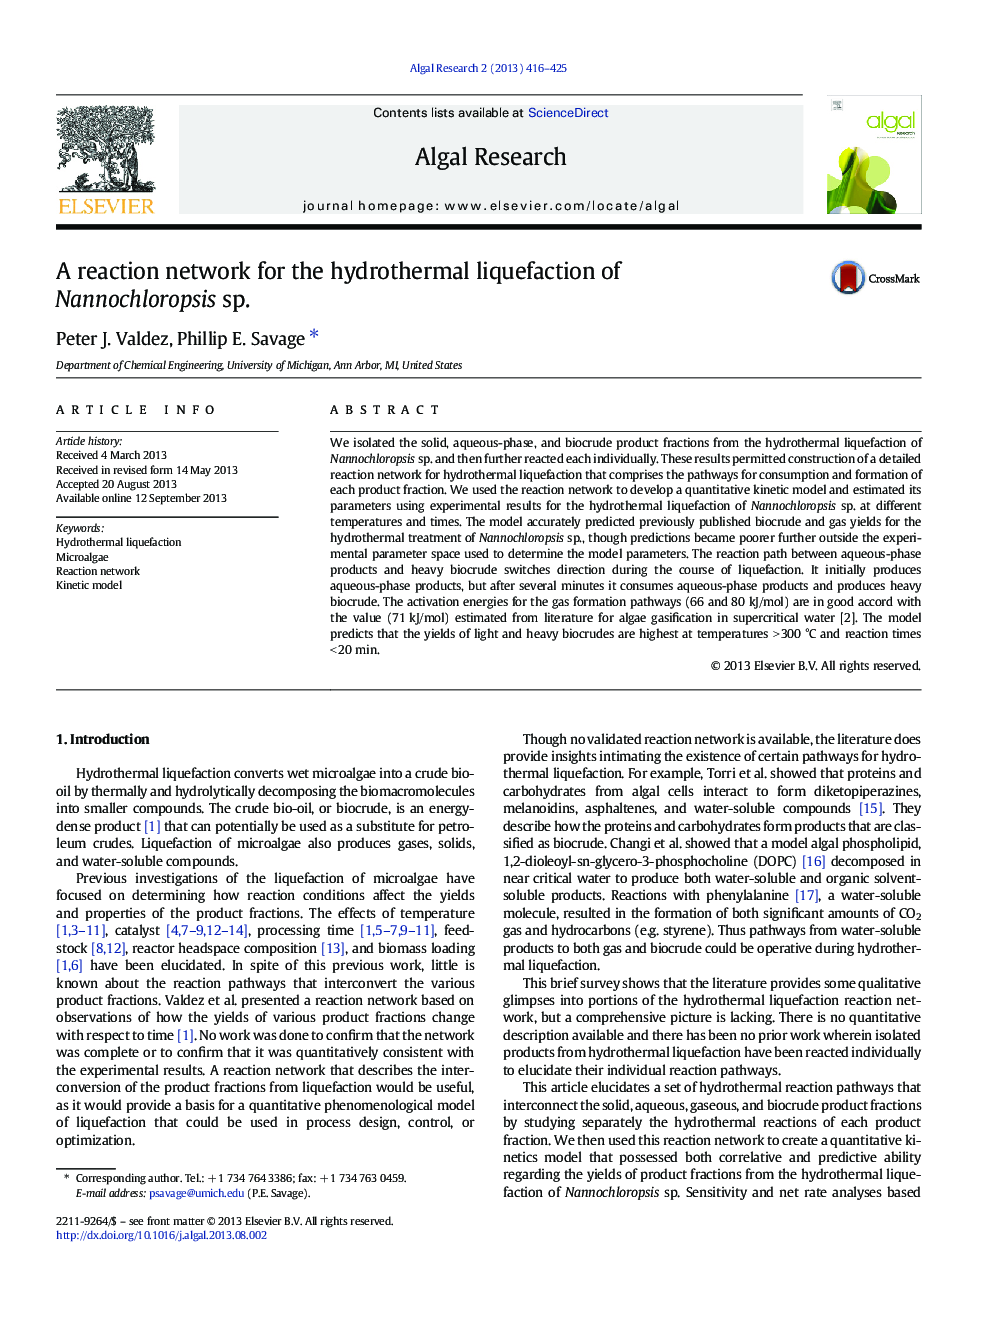 A reaction network for the hydrothermal liquefaction of Nannochloropsis sp.